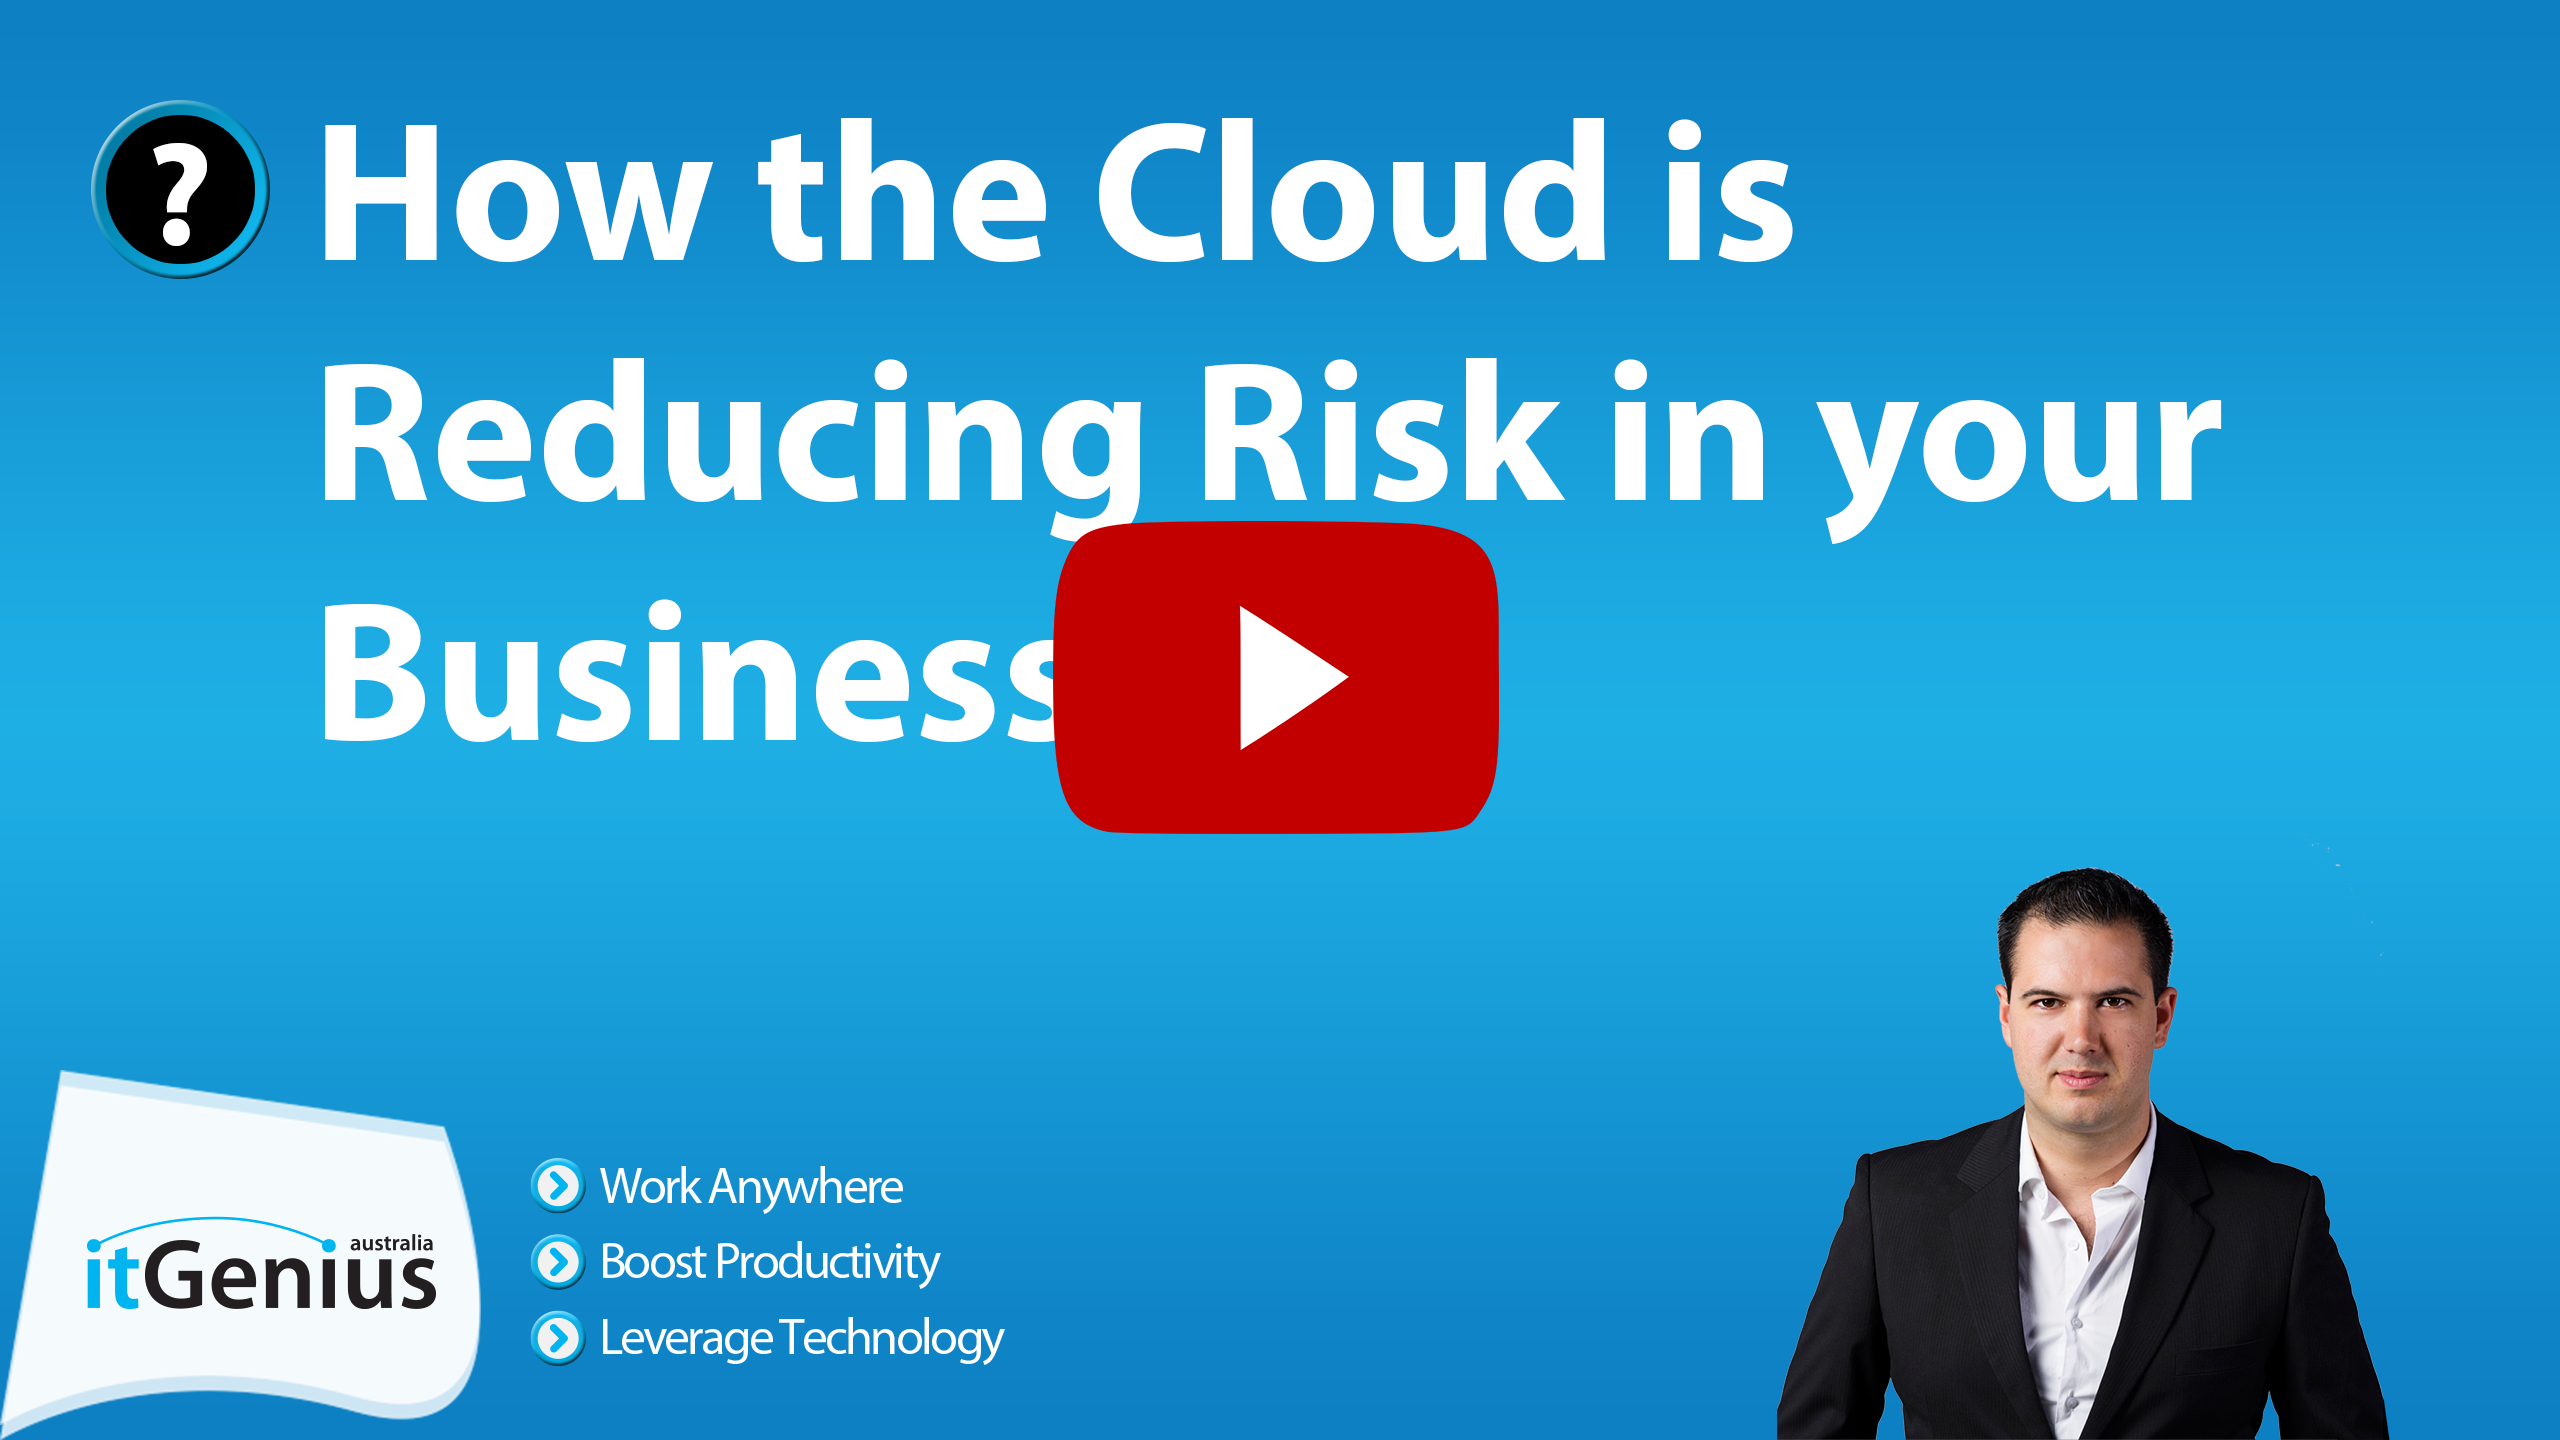 How the Cloud is Reducing Risk in your Business.